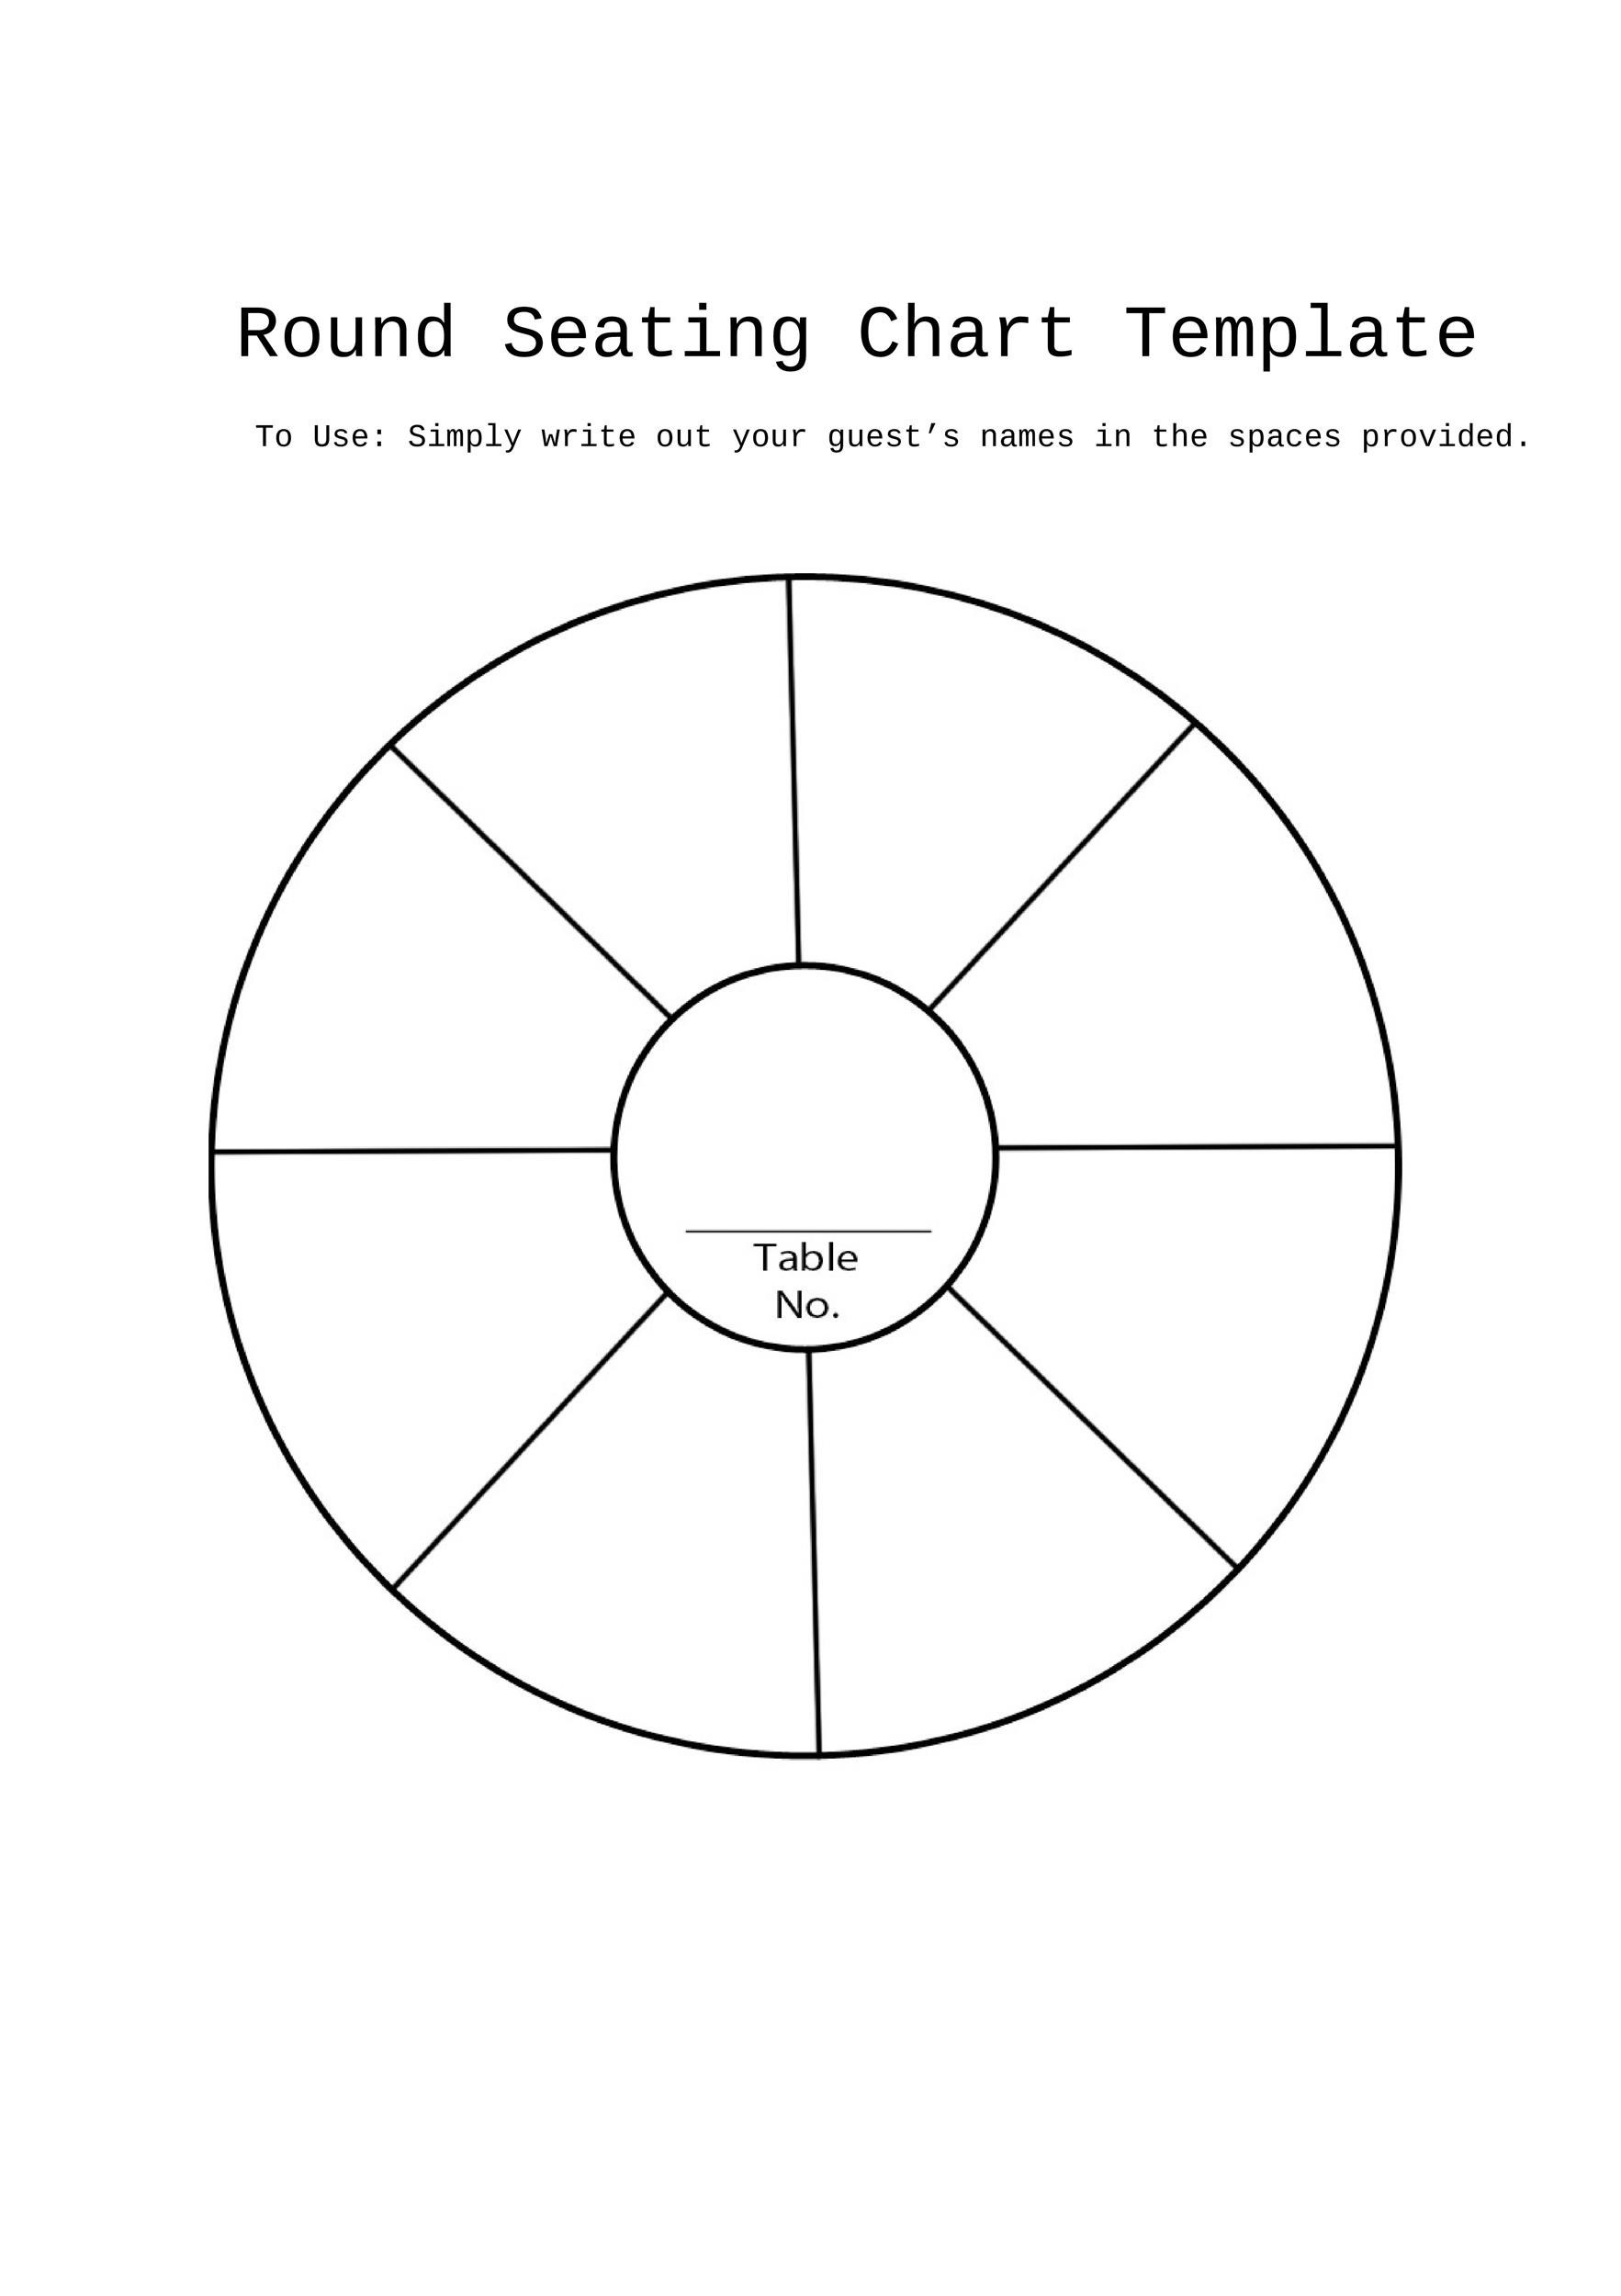 round-table-seating-chart-for-8-brokeasshome